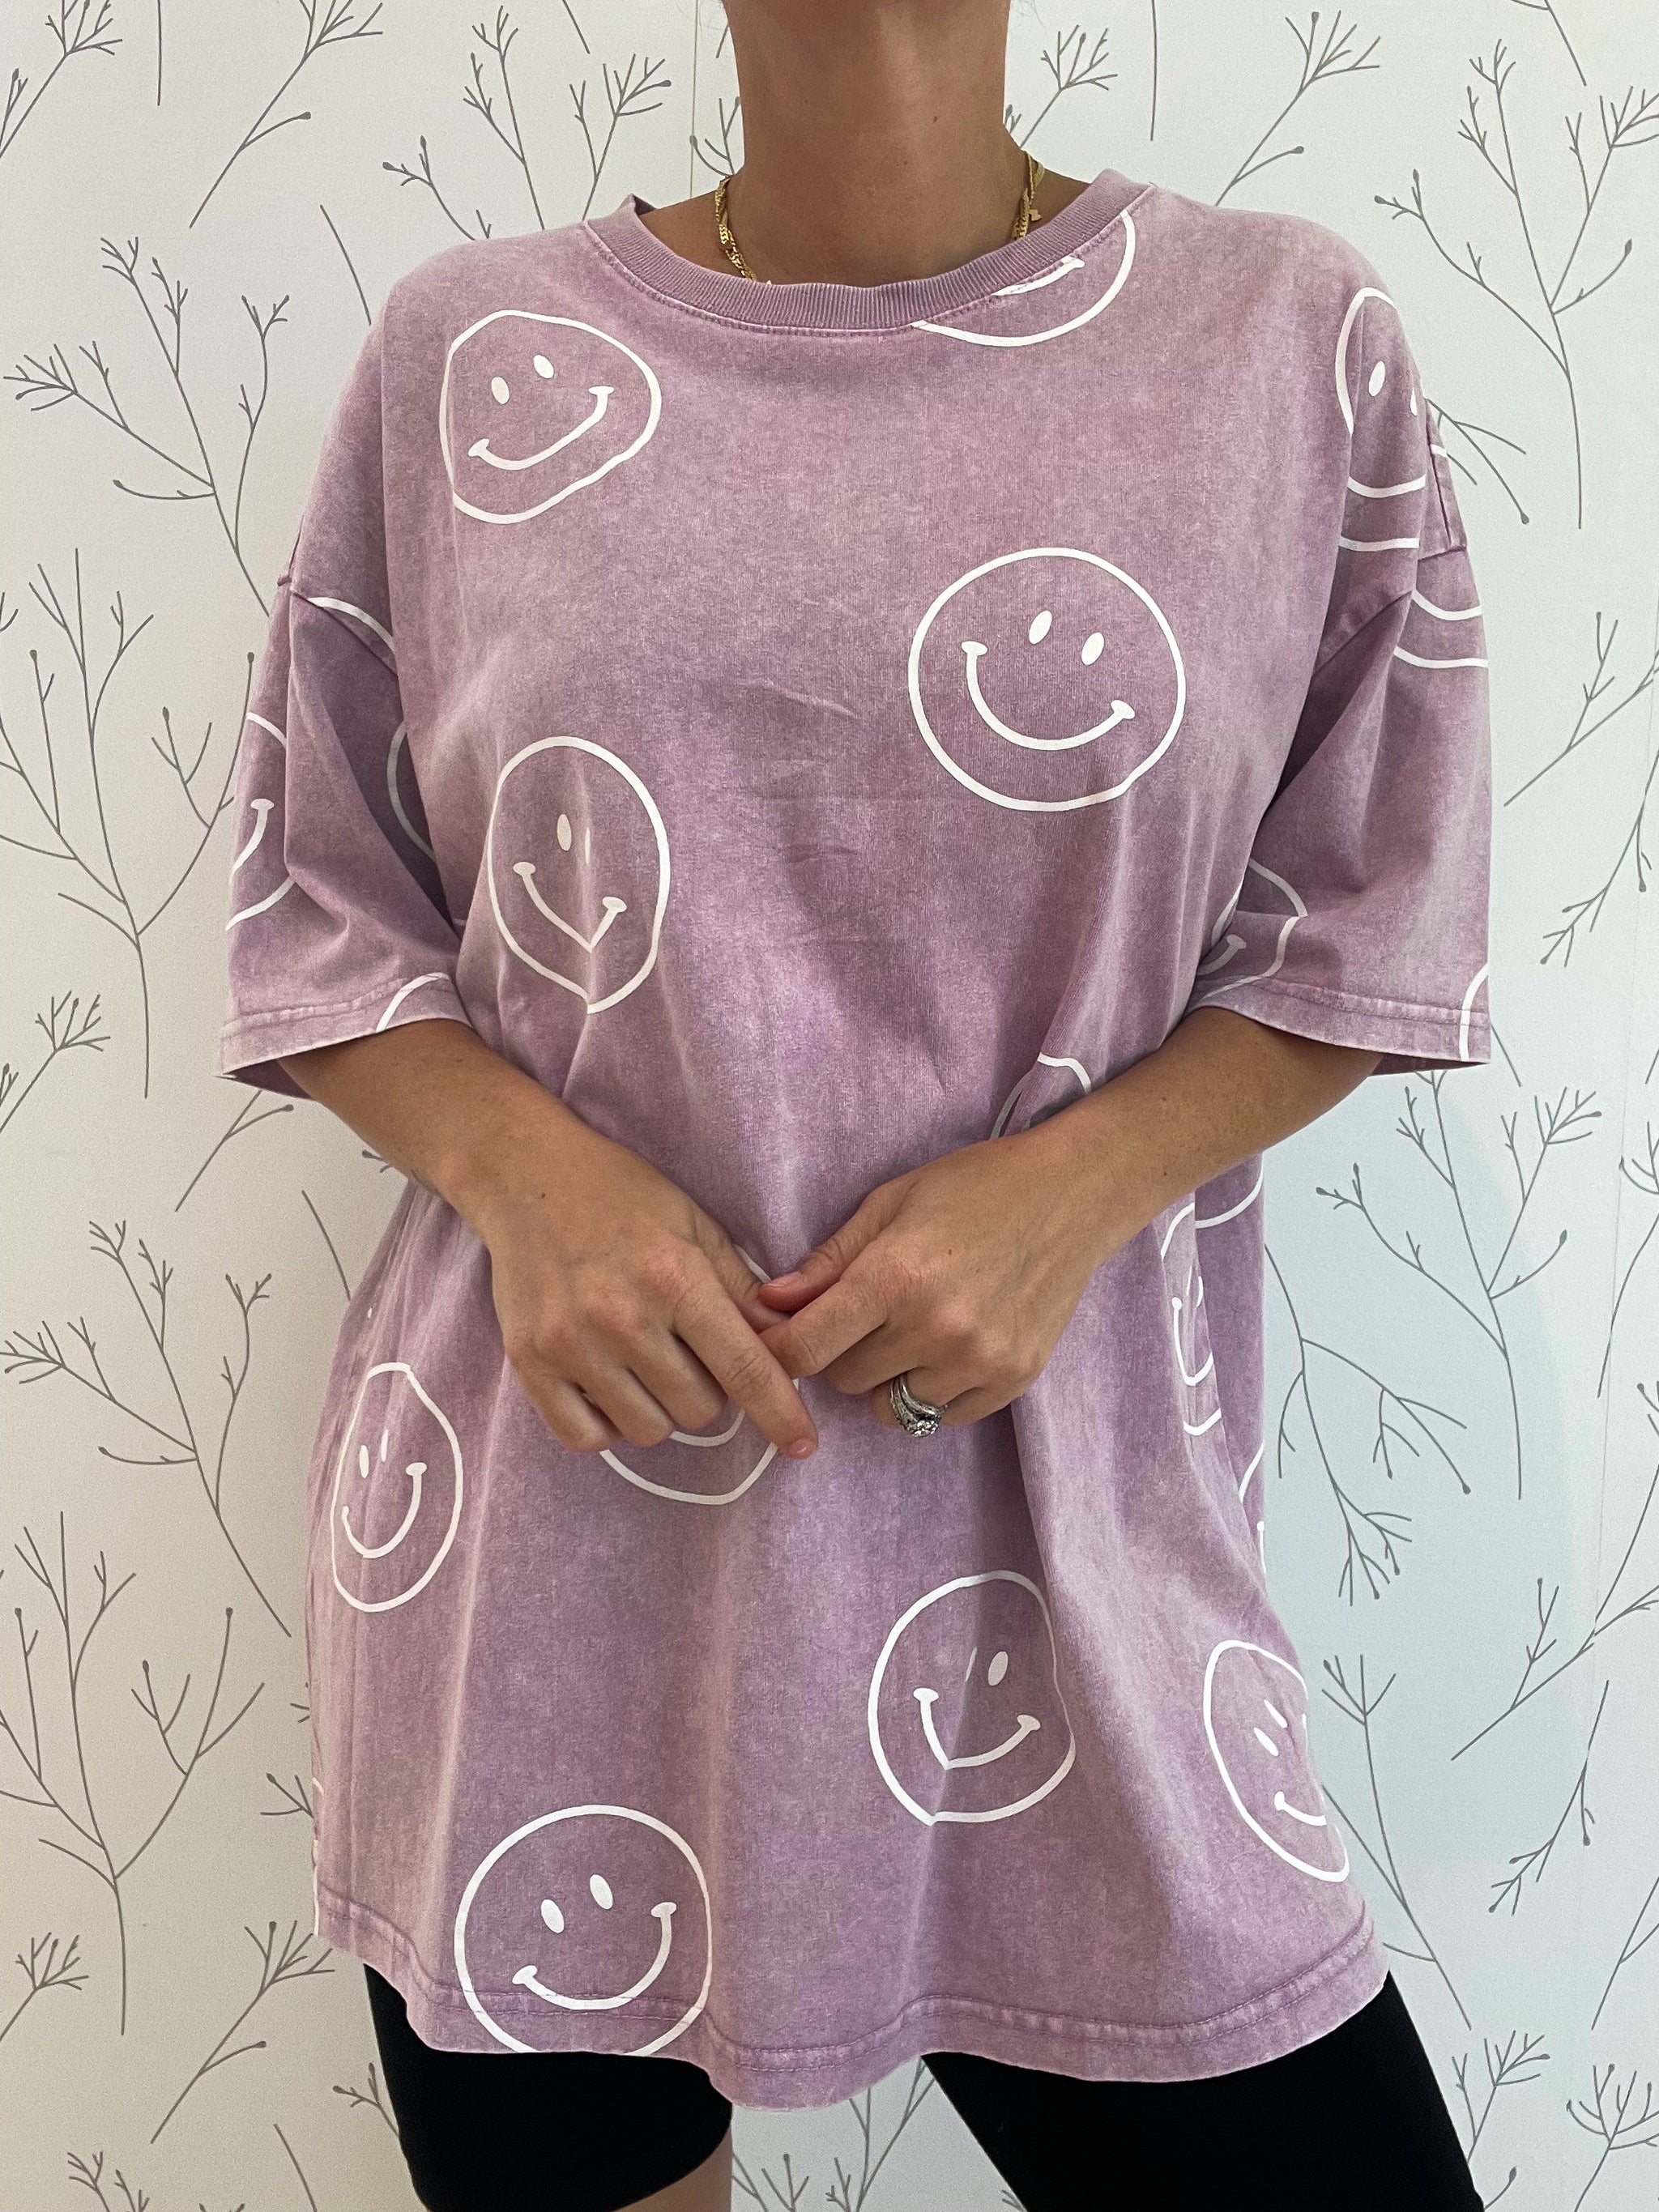 Smiley Face Printed Top